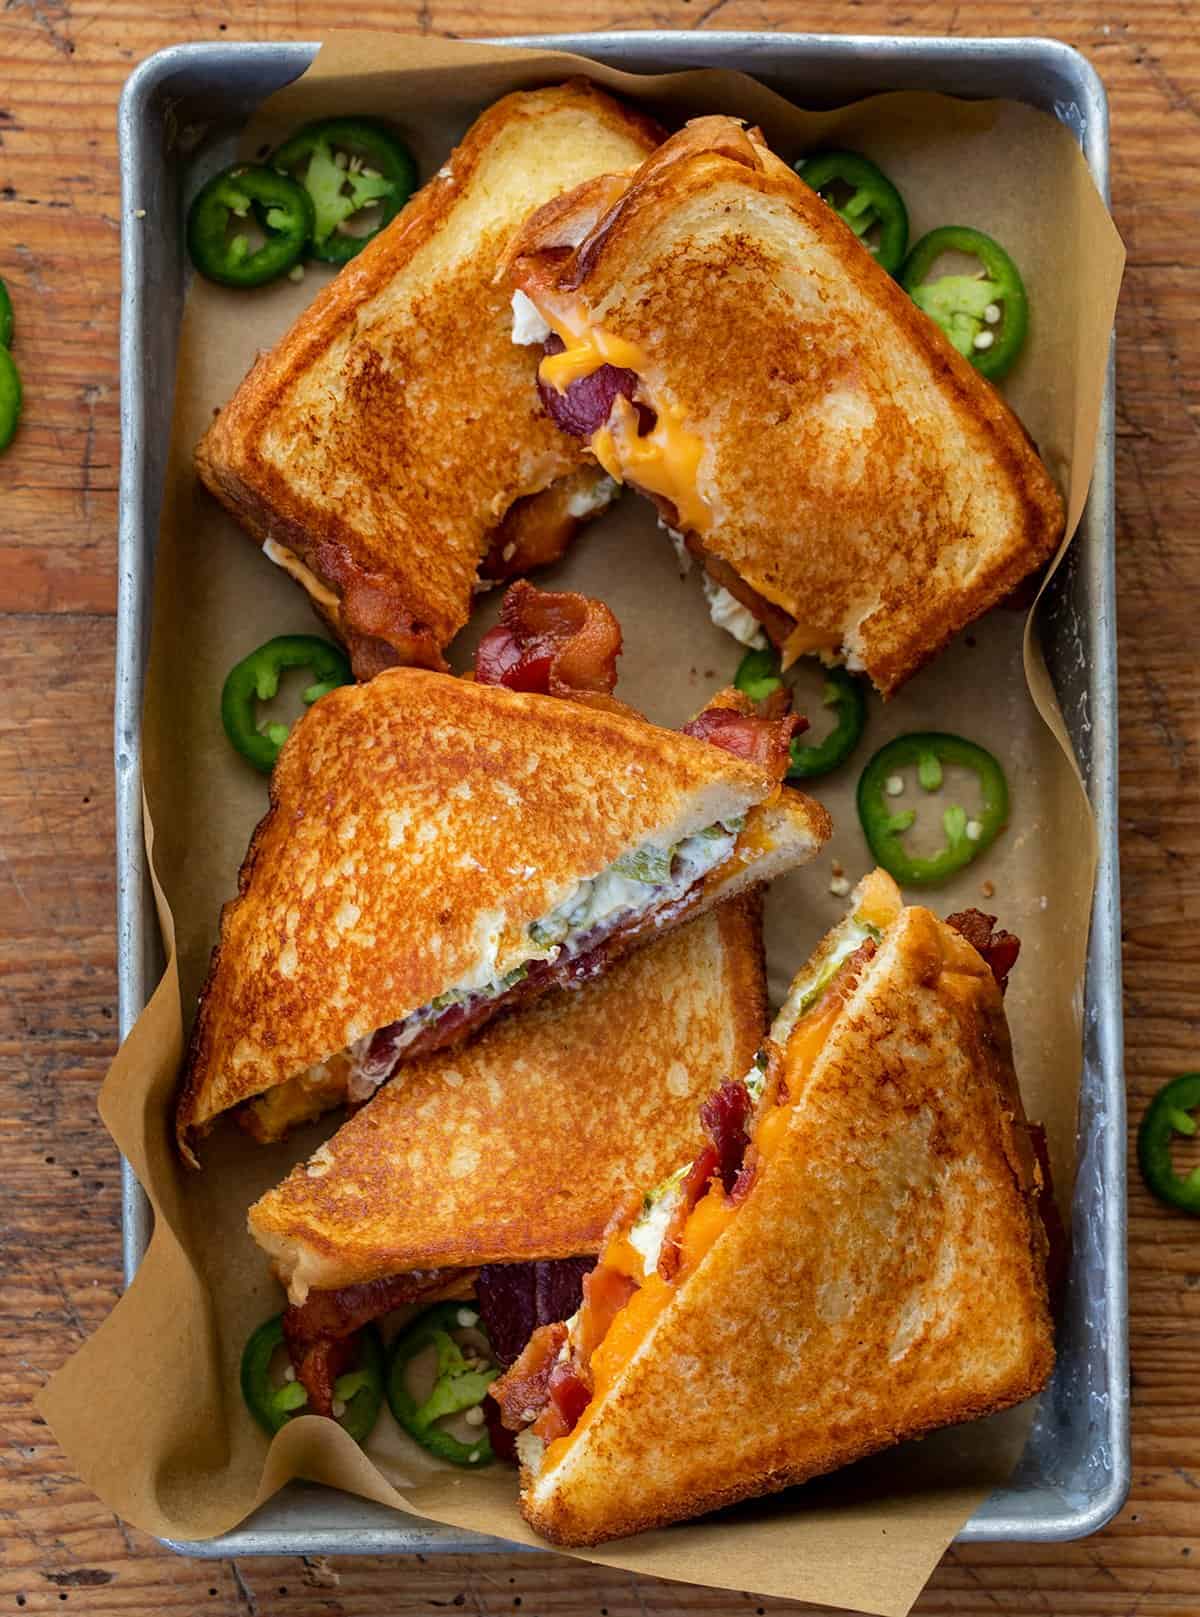 Pan of Roasted Jalapeno Popper Grilled Cheese Sandwiches from Overhead on a Cutting Board